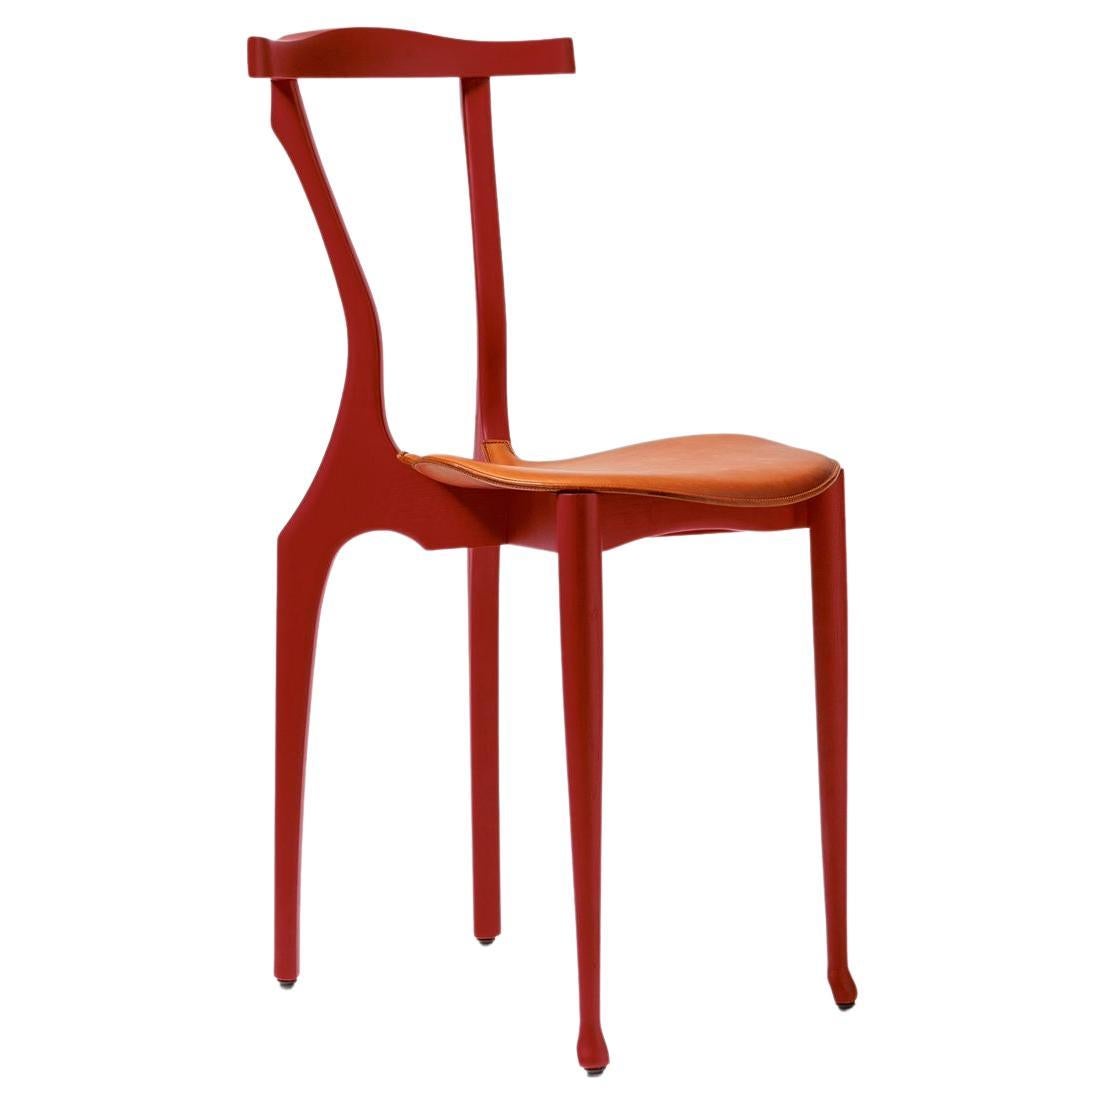 Contemporary Spanish design "Gaulinetta" chair by Oscar Tusquets red ash wood